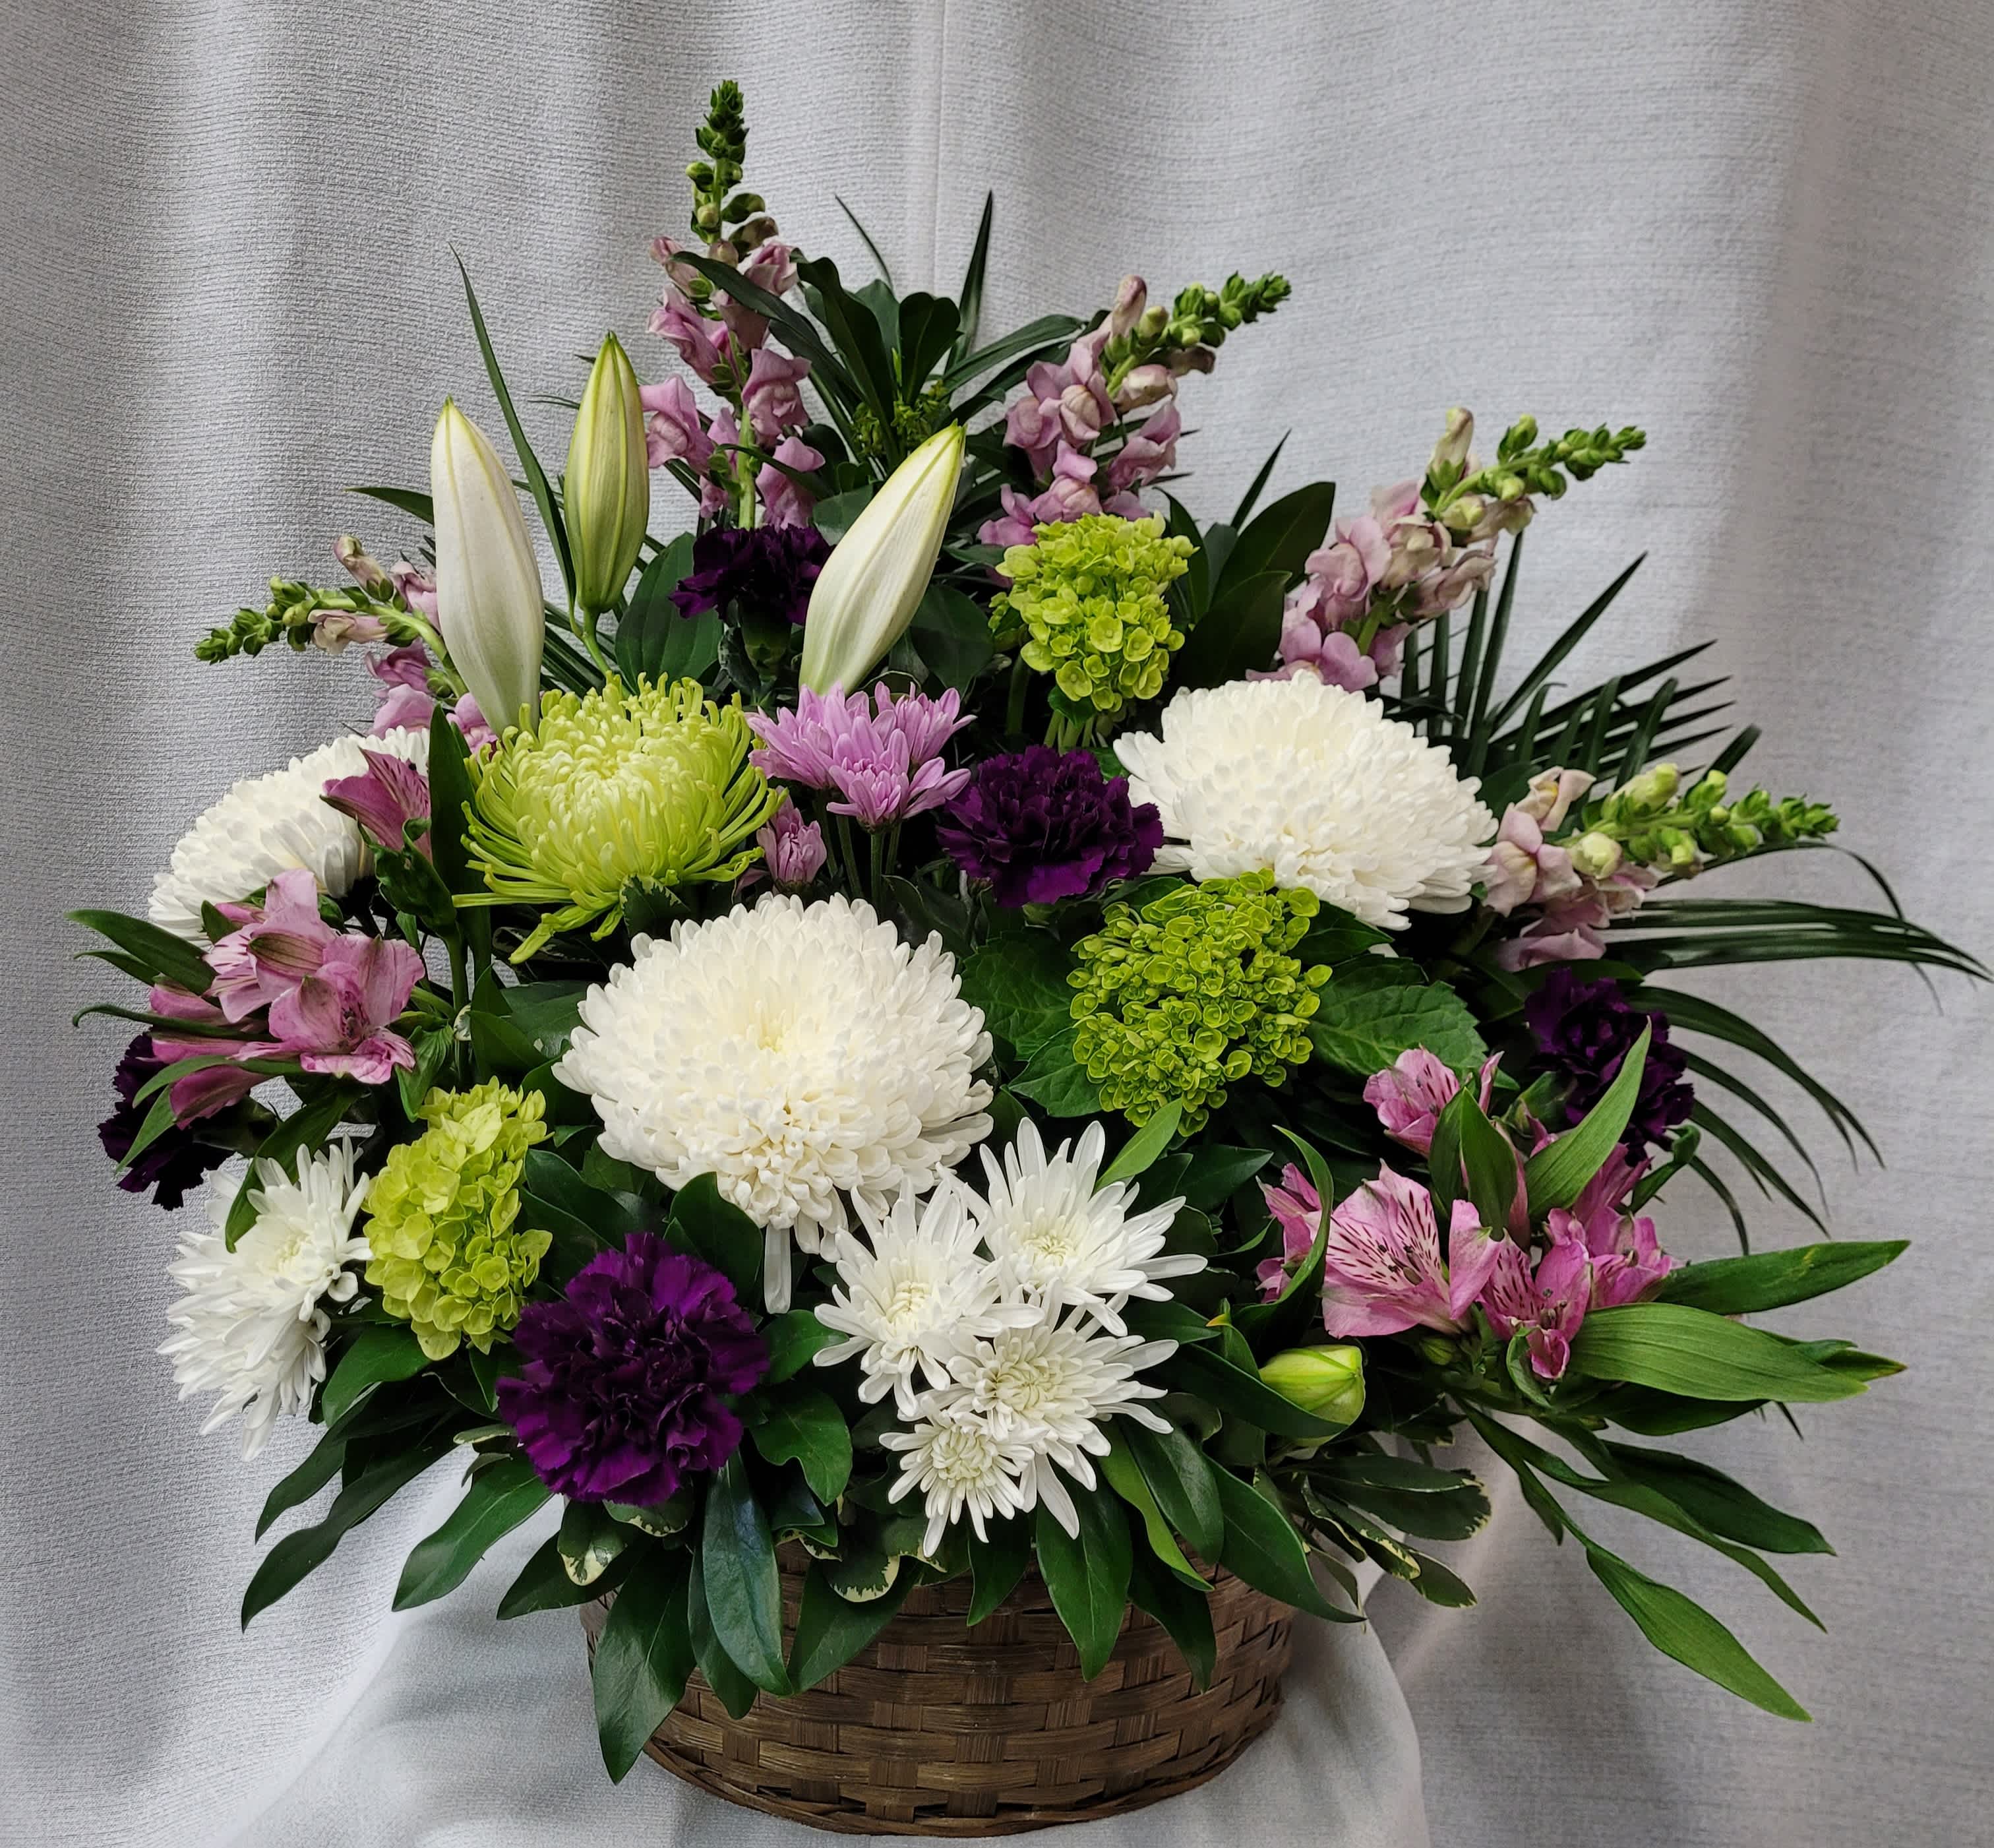 Beautiful Tribute  - This basket is filled with snapdragons, hydrangeas, mums, carnations,  daisies and alstromeria. 